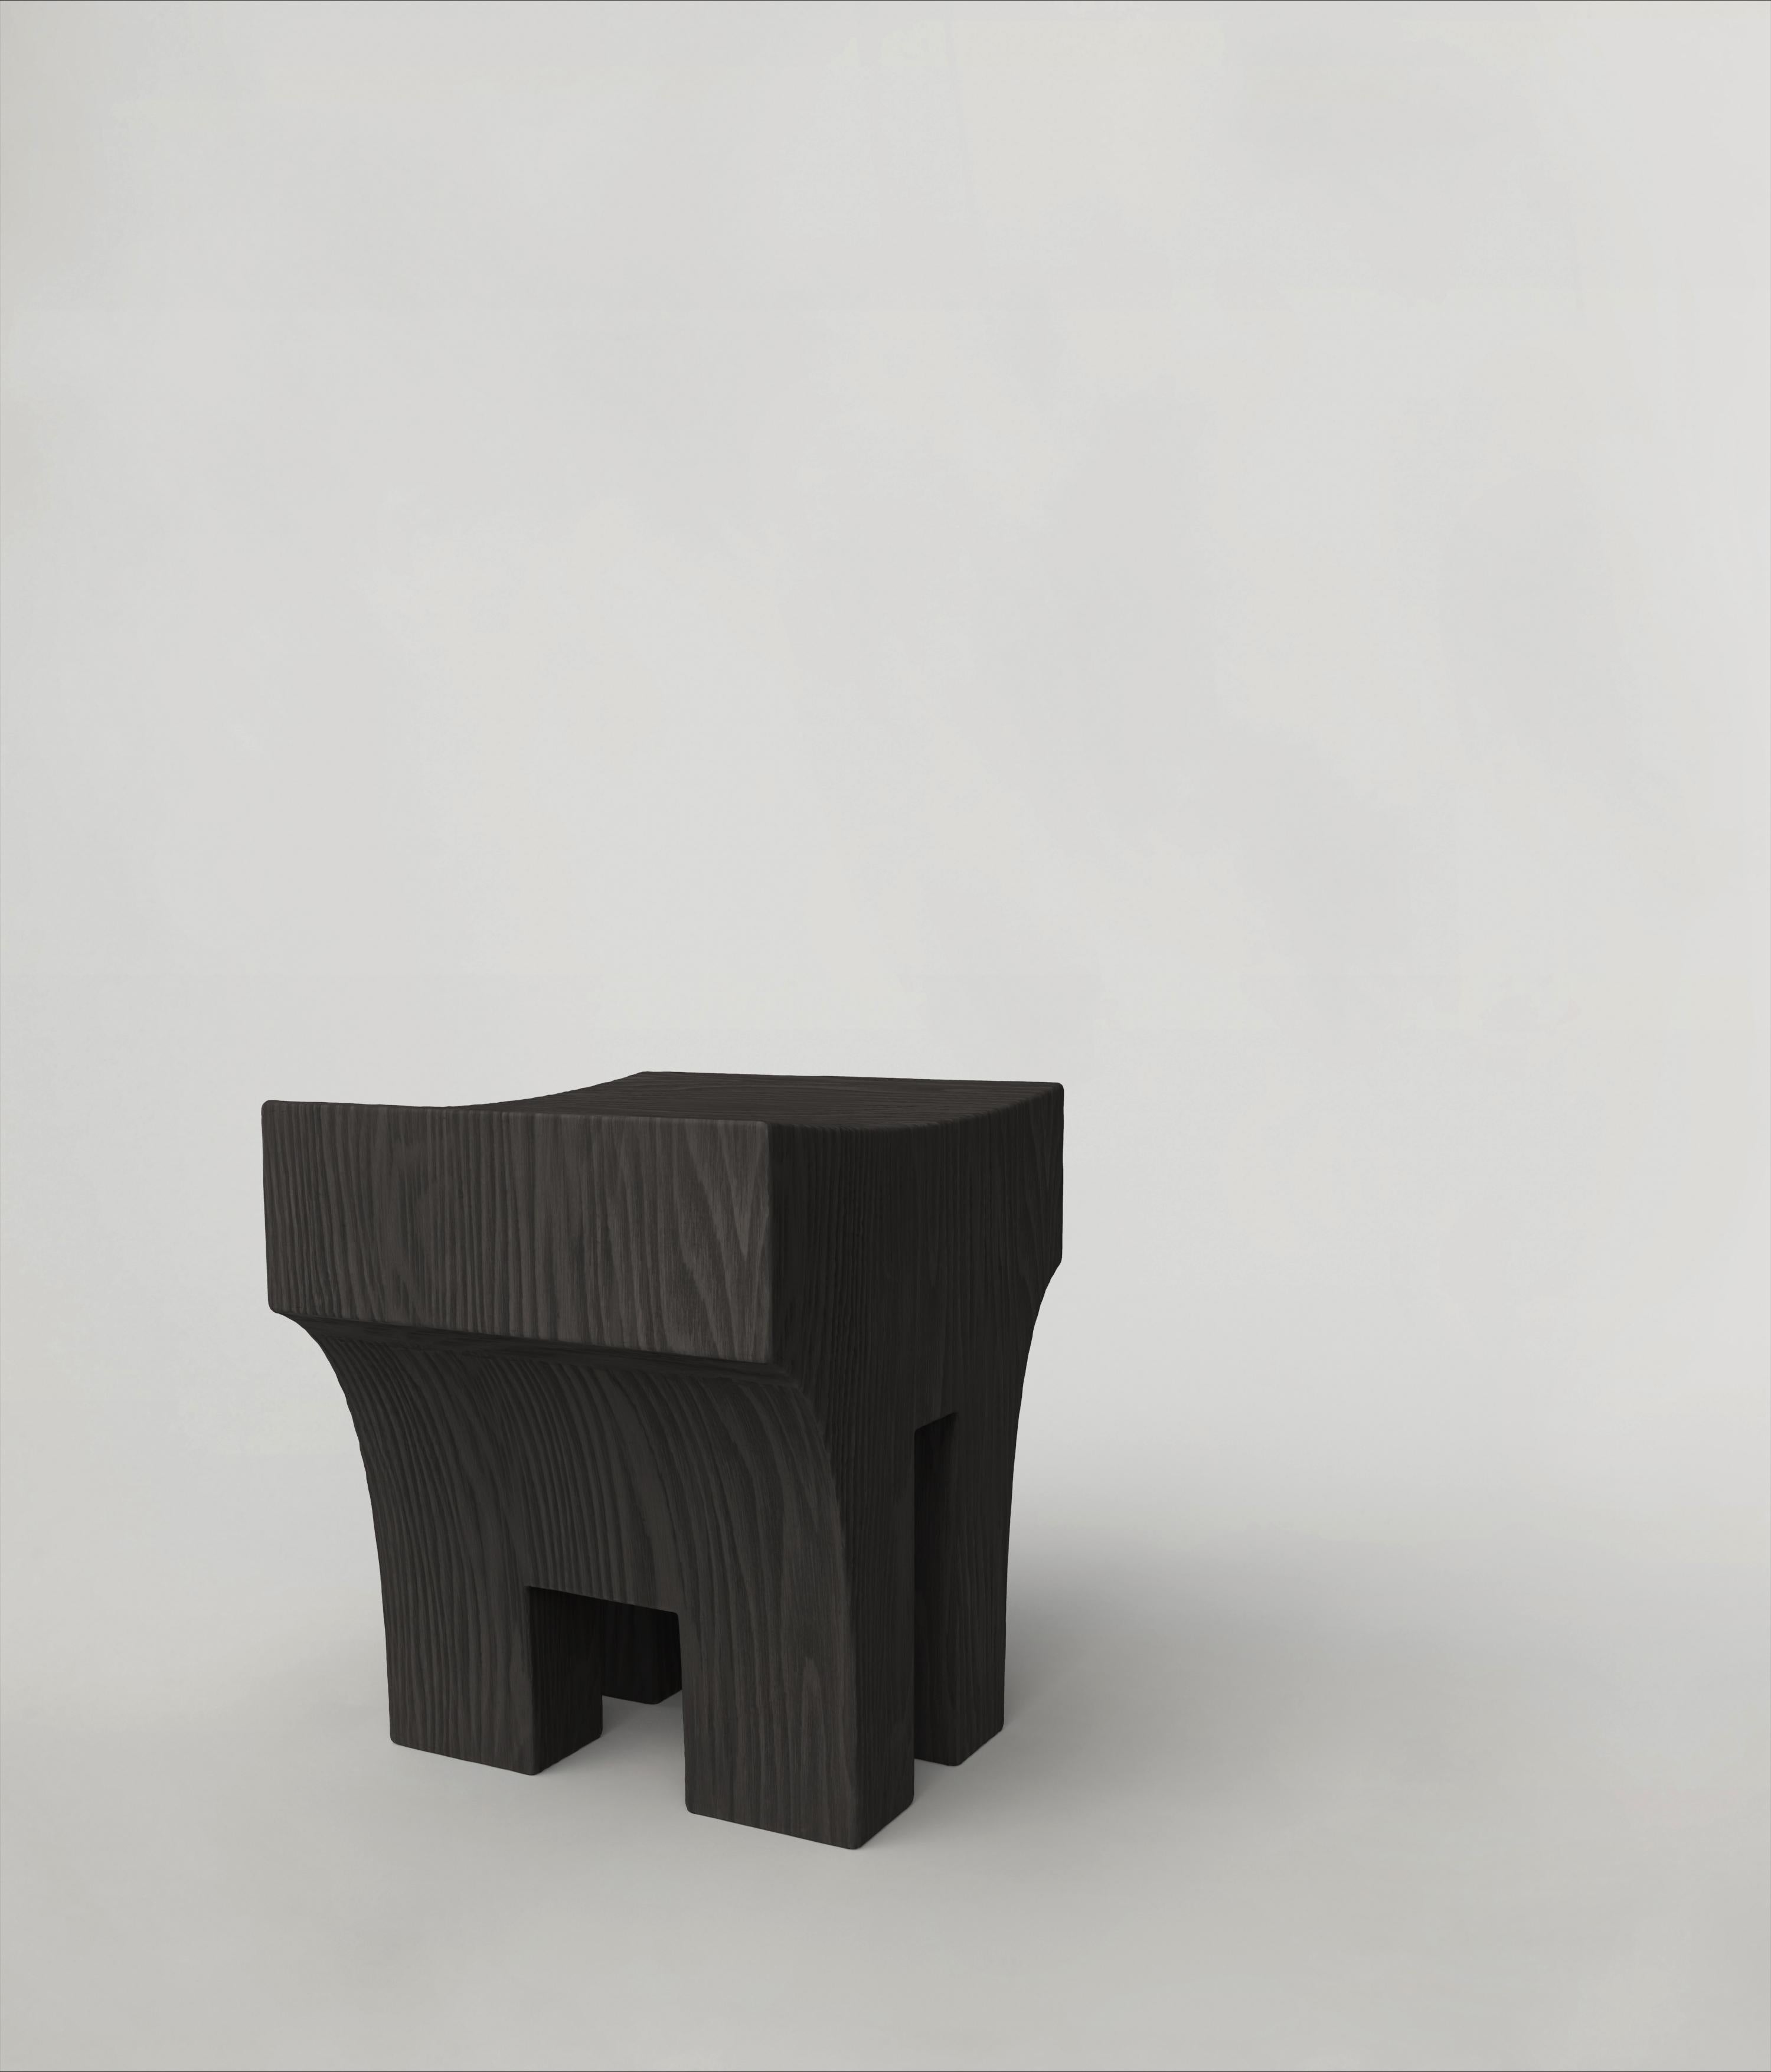 Woodwork Contemporary Limited Edition Signed Charred Stool, Mhono V1 by Edizione Limitata For Sale